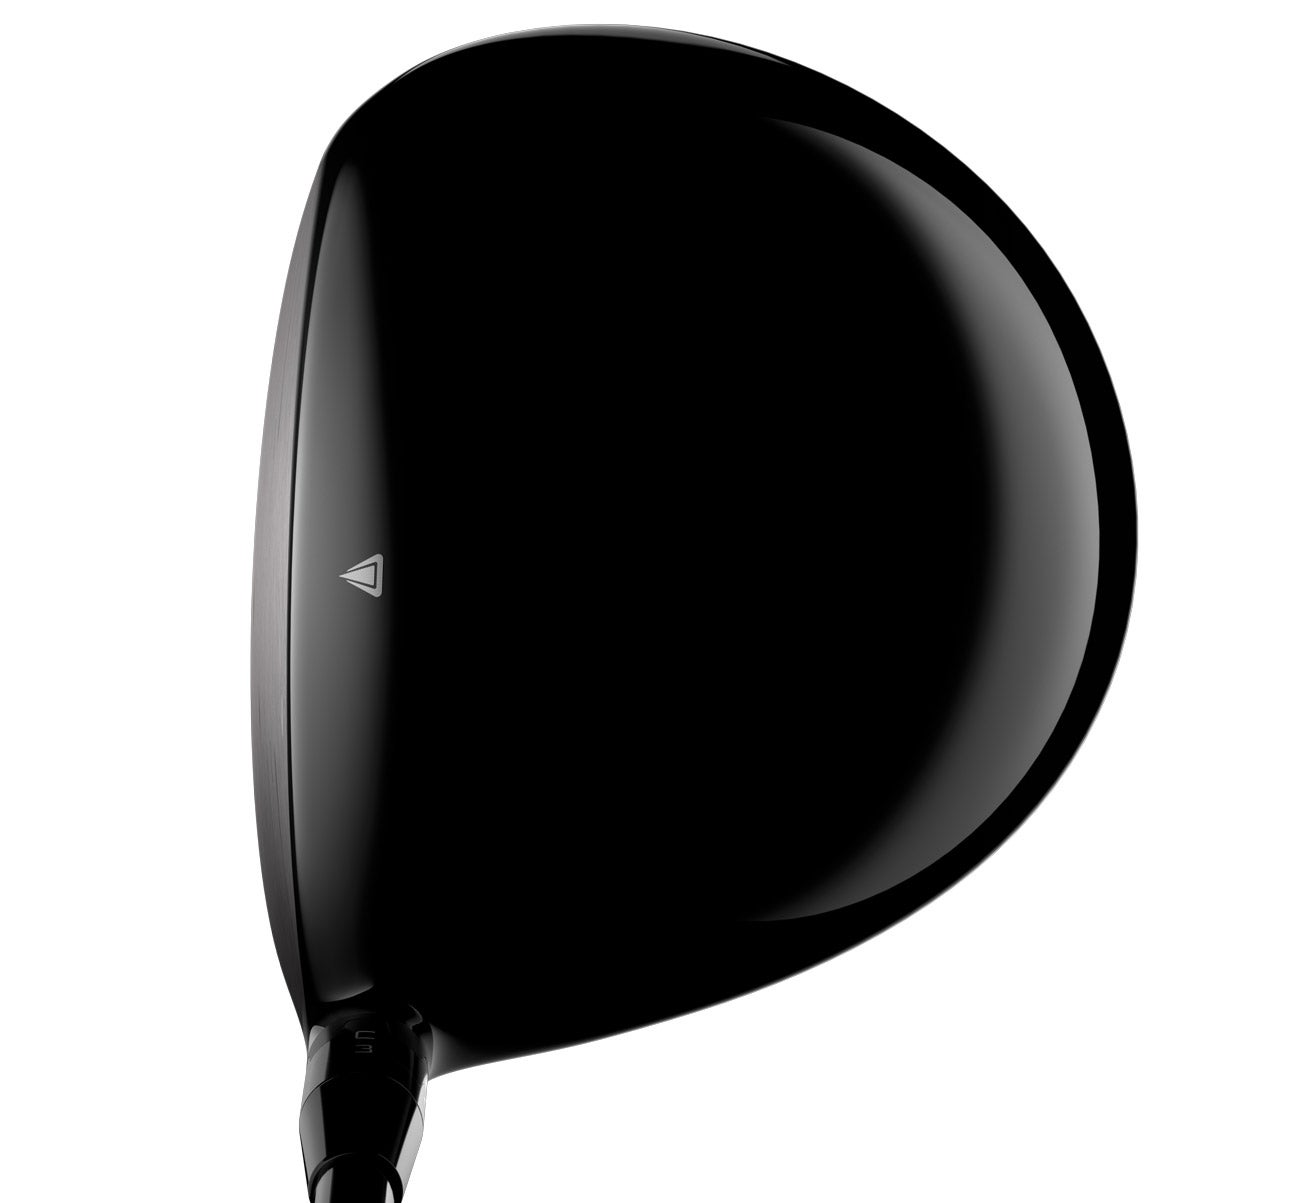 Titleist TS3 driver review, photos and more: ClubTest 2020